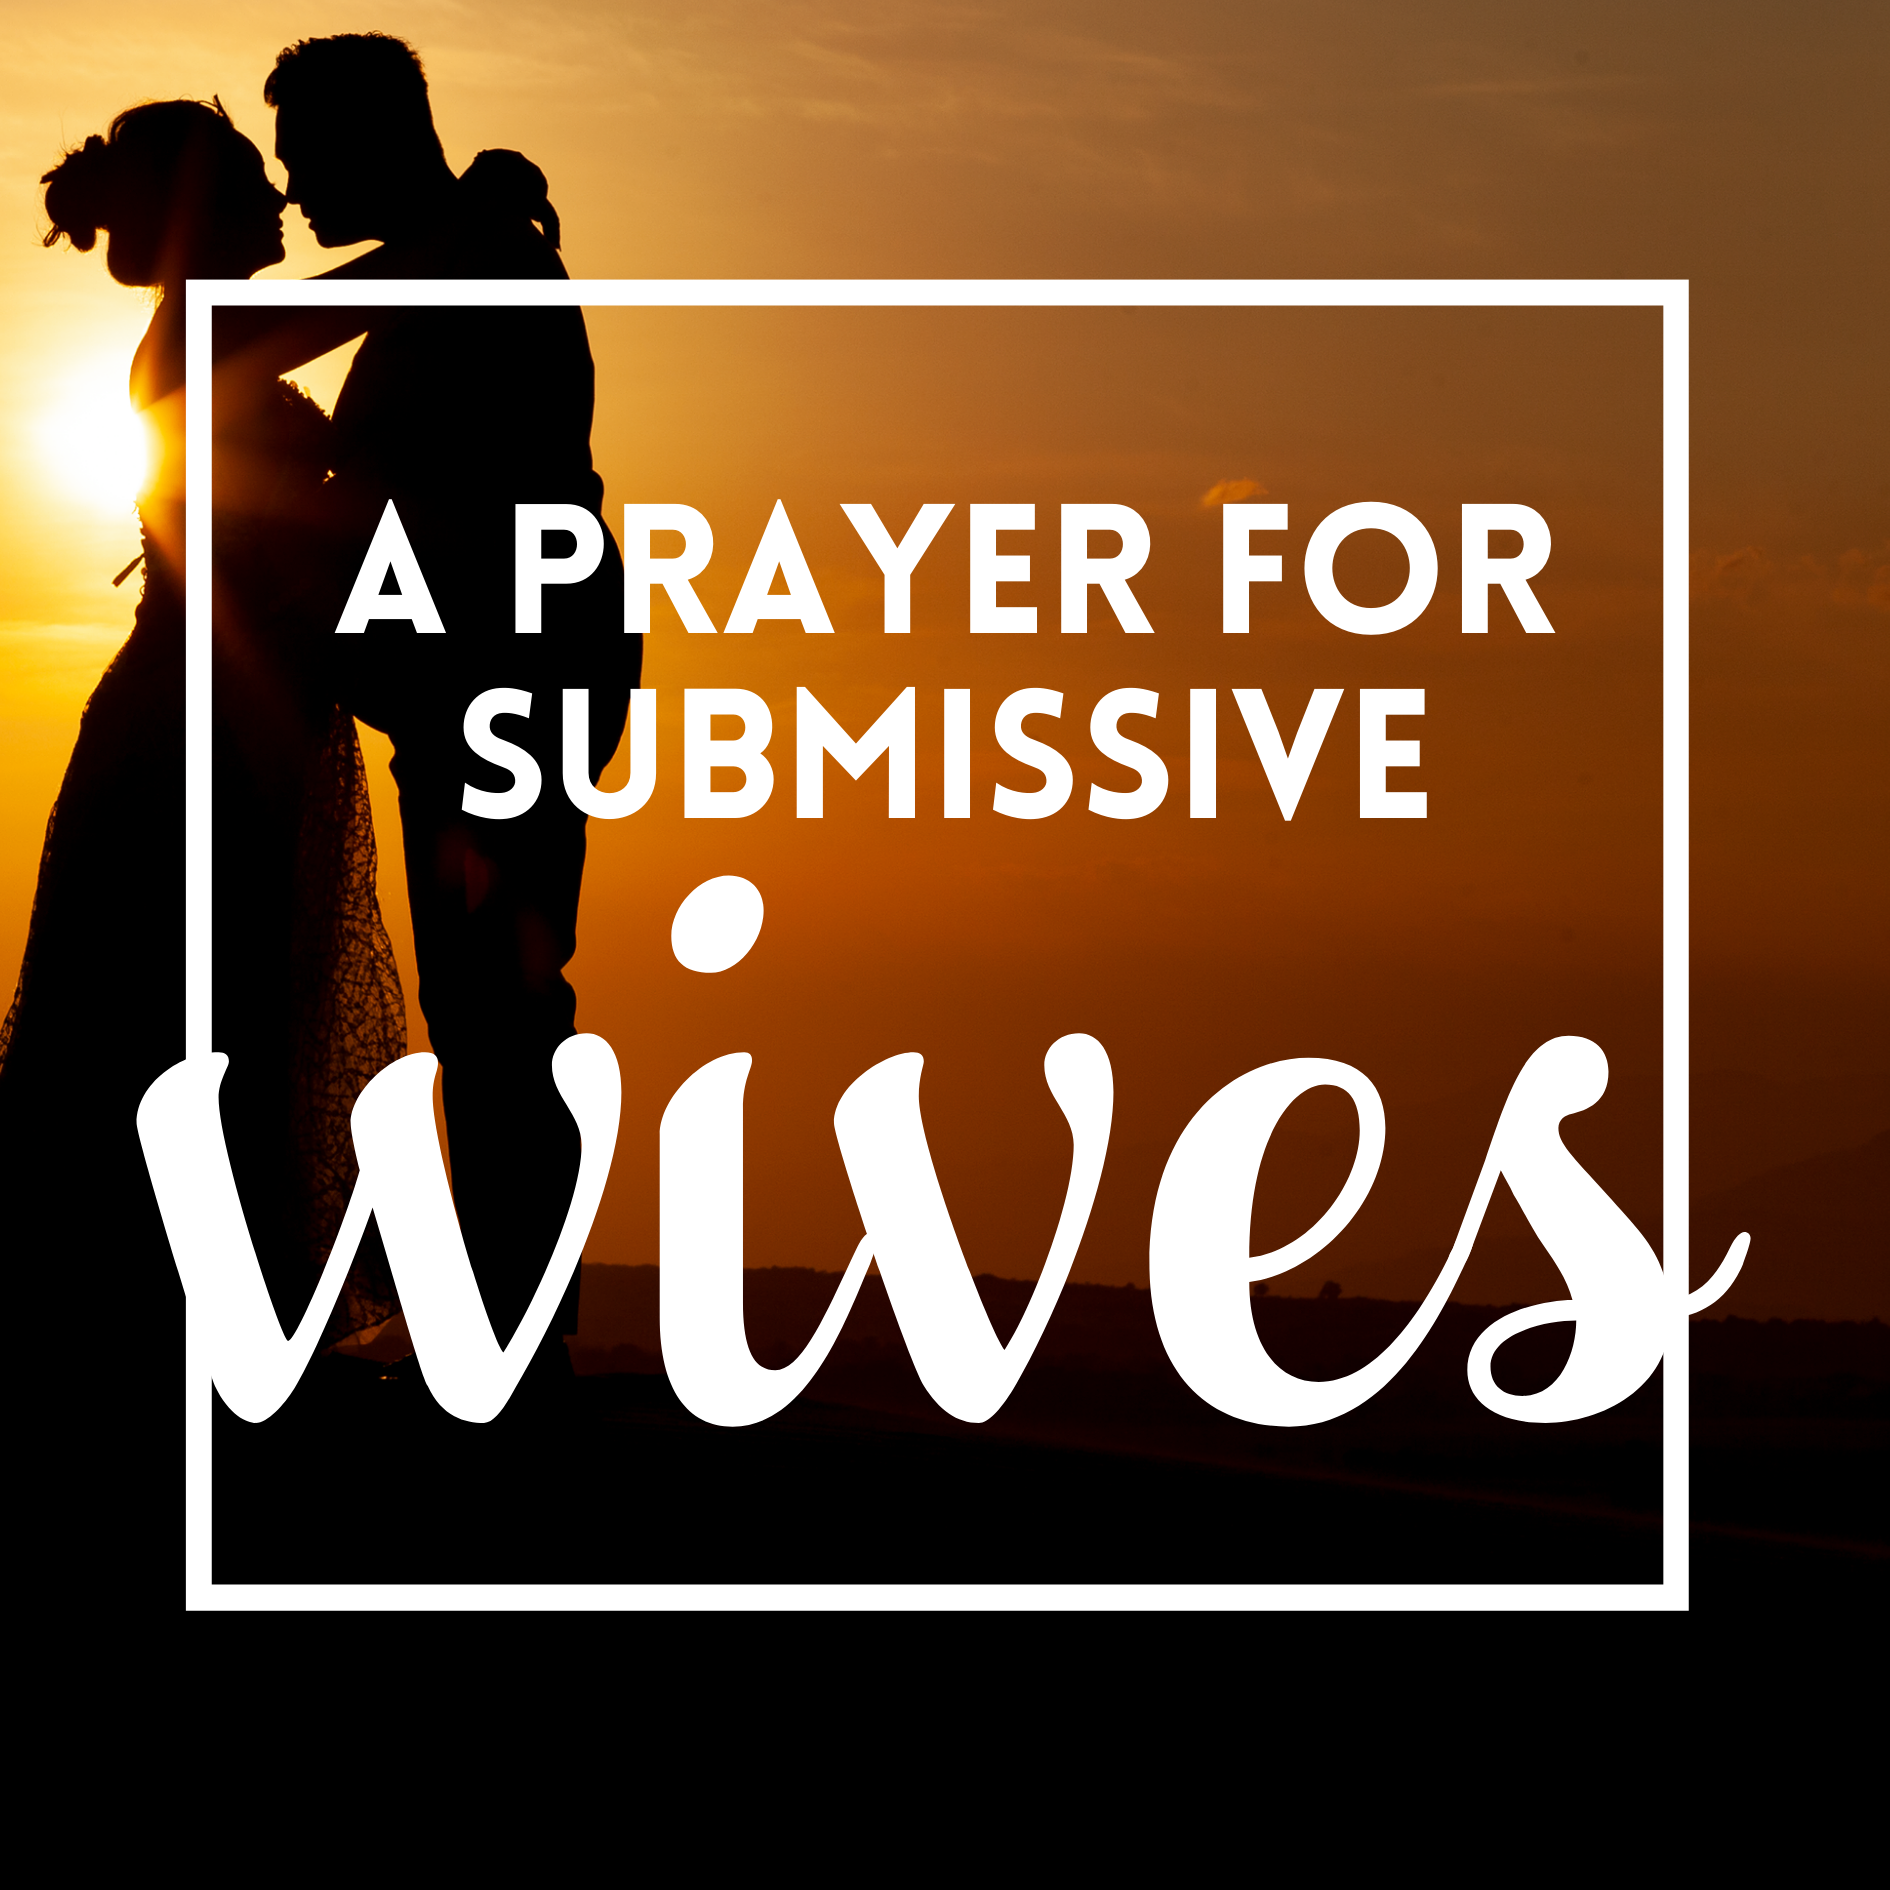 A Prayer for Submissive Wives